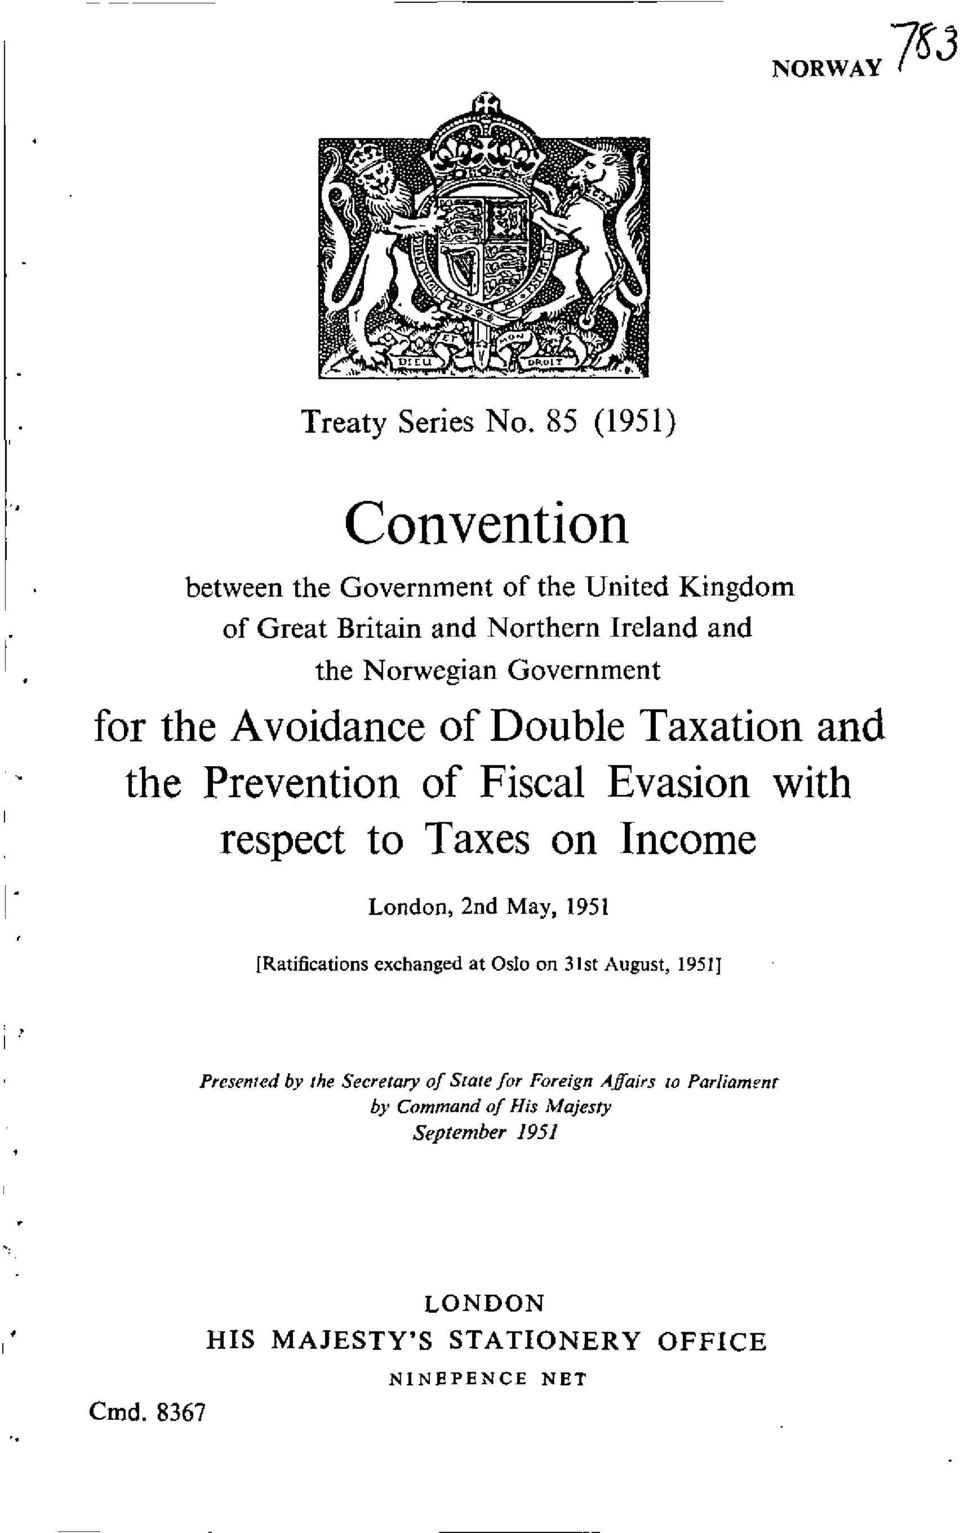 Government for the Avoidance of Double Taxation and the Prevention of Fiscal Evasion with respect to Taxes on Income London, 2nd